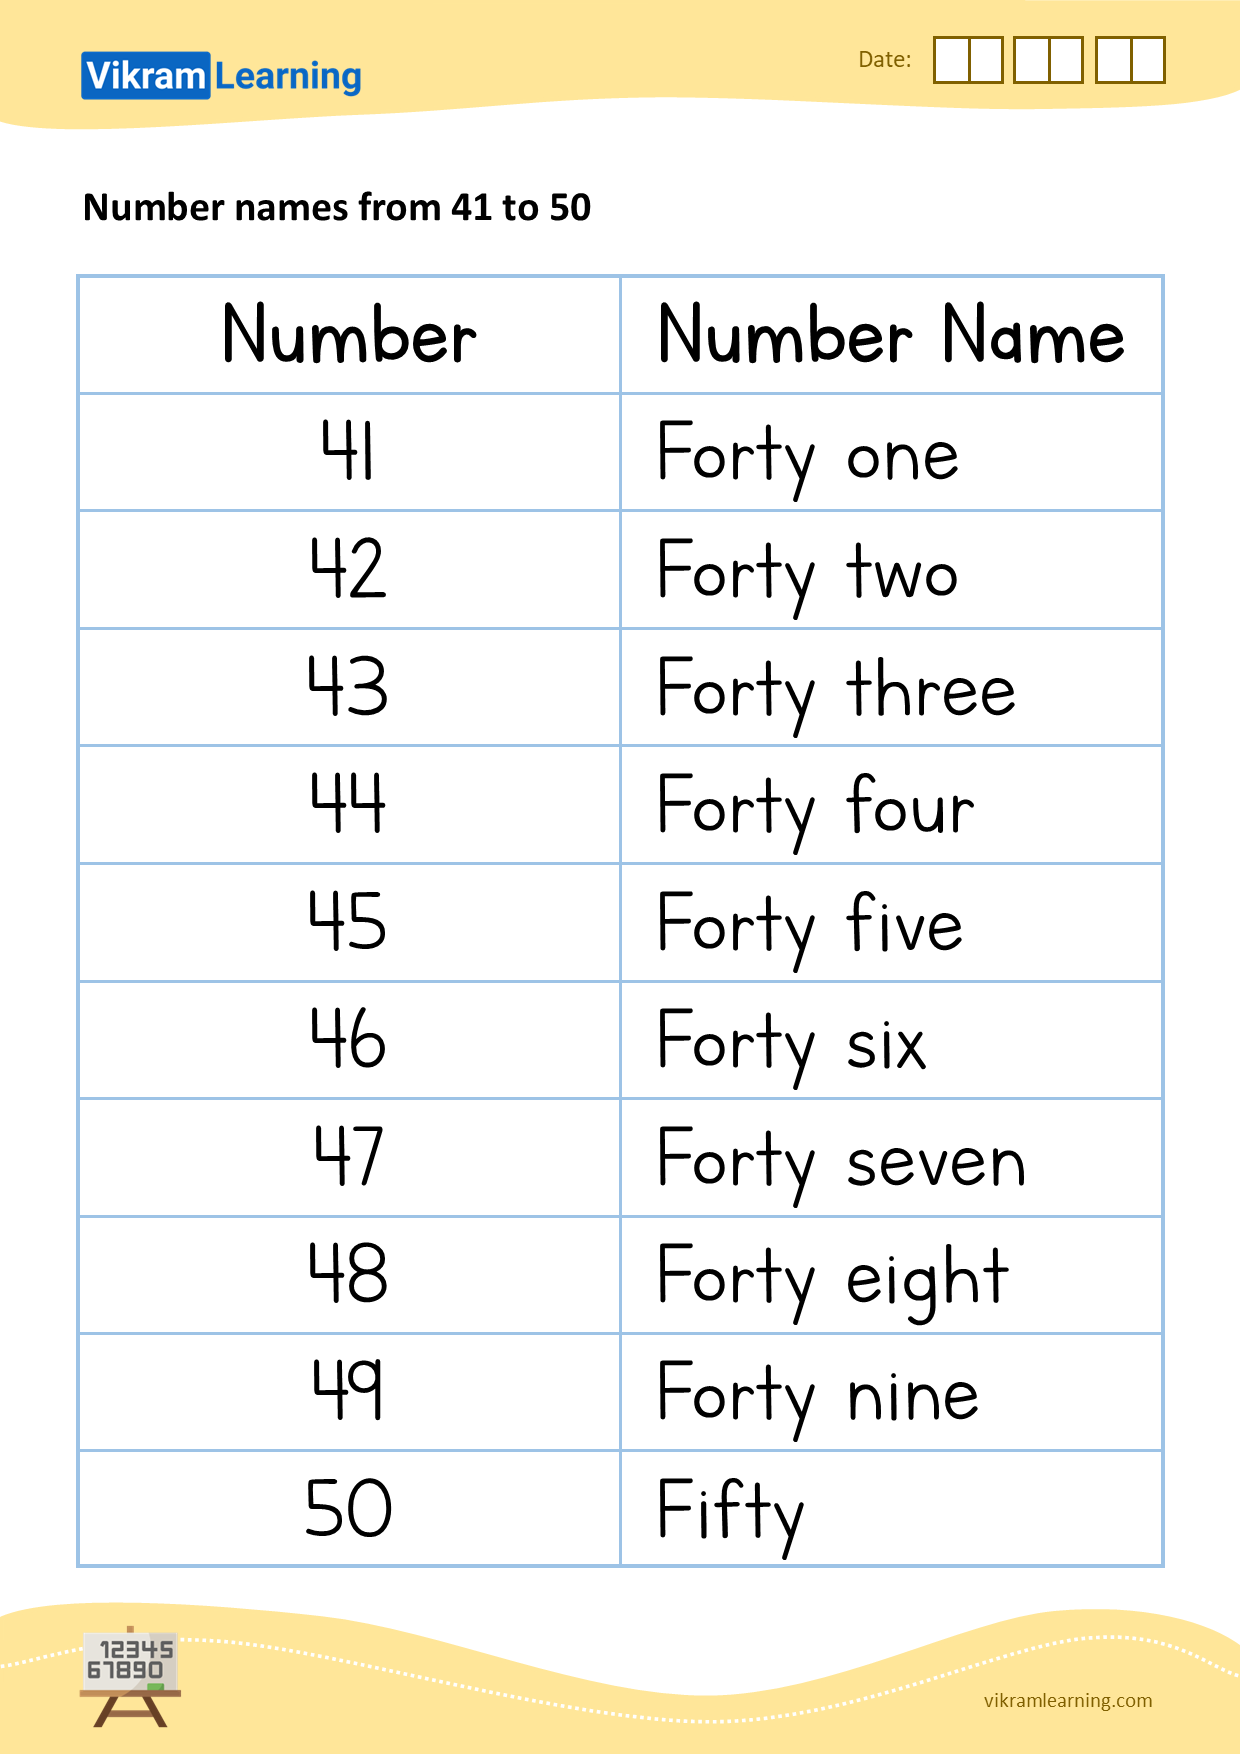 download-number-names-from-41-to-50-worksheets-vikramlearning